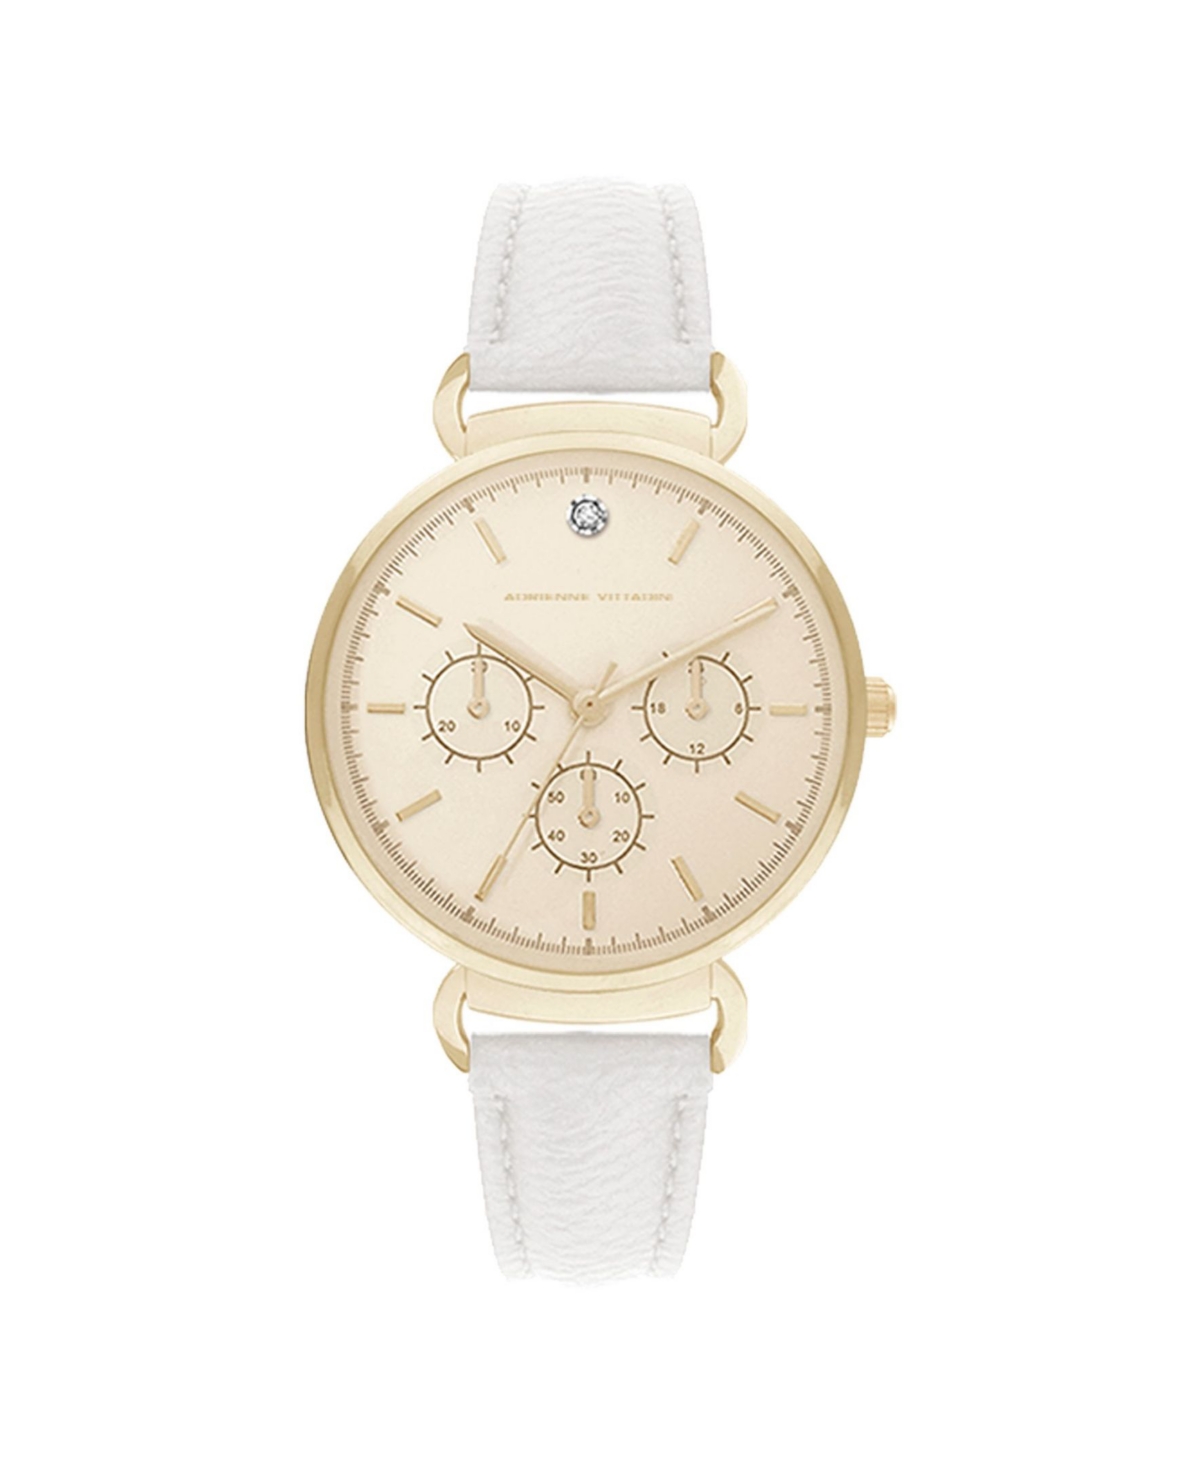 Women's Mock Chronograph and White Leather Strap Watch 36mm - White